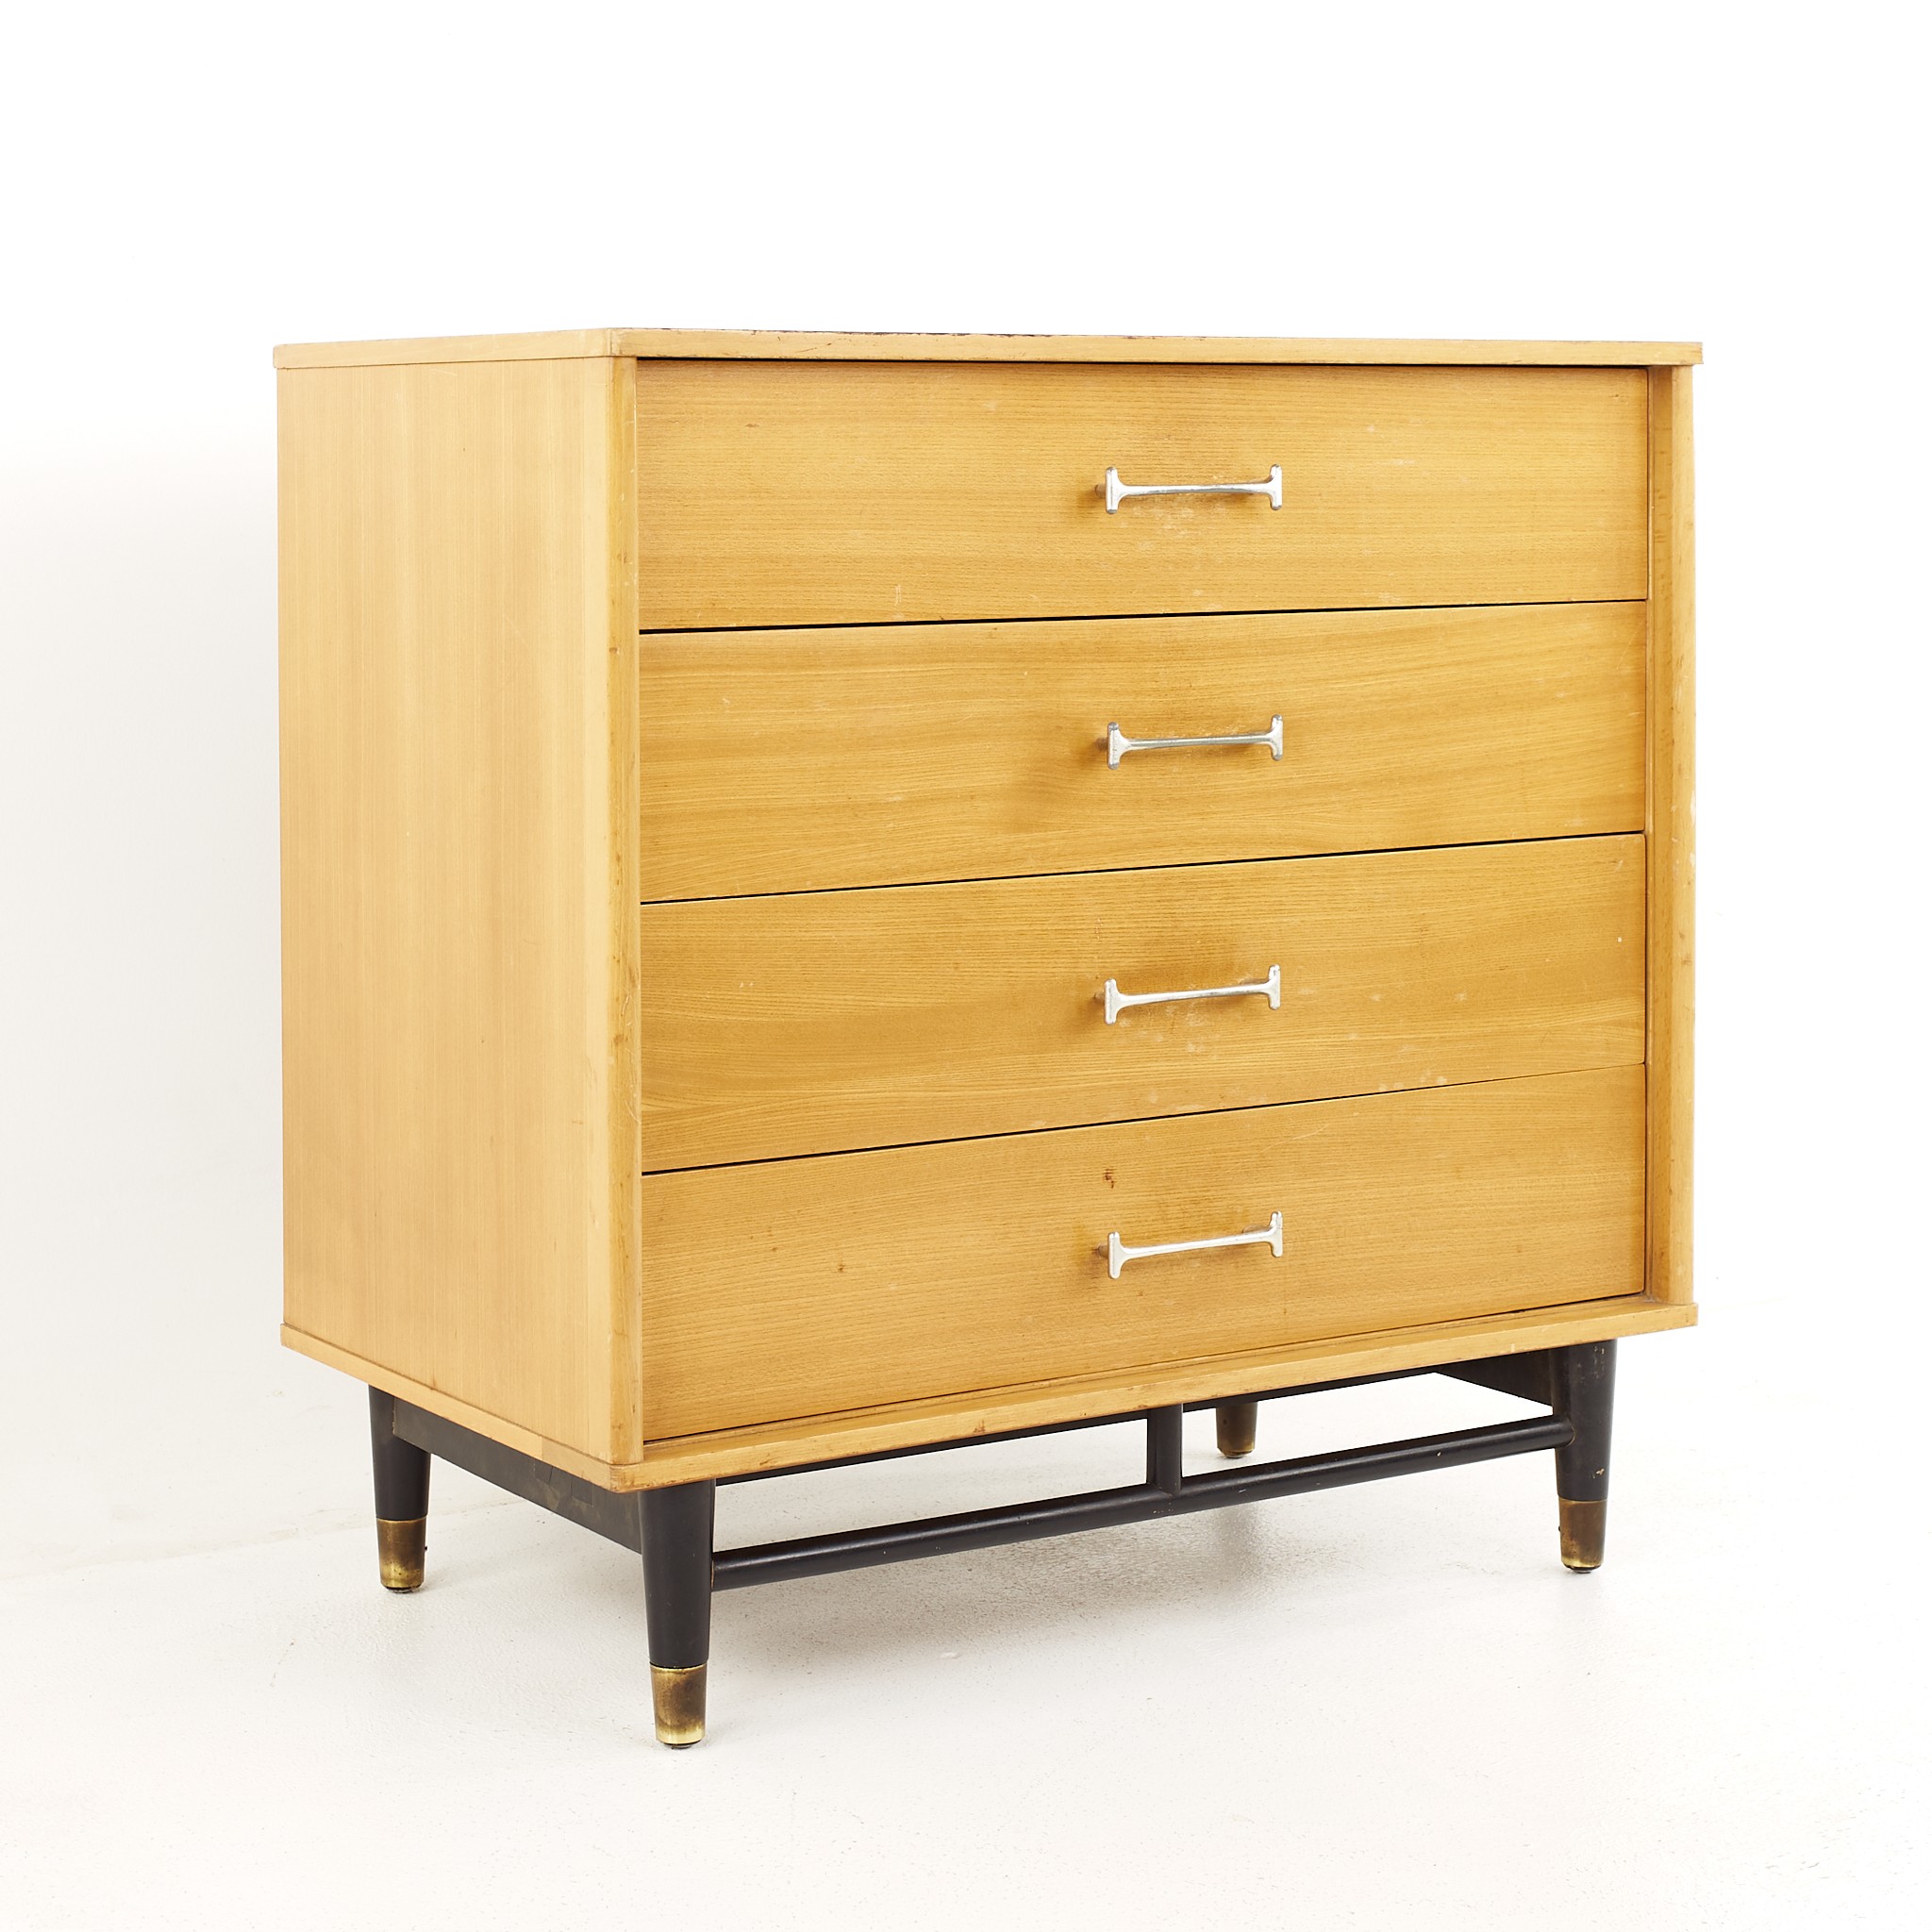 Milo Baughman for Drexel Todays Living Mid Century Chest of Drawers Cabinet